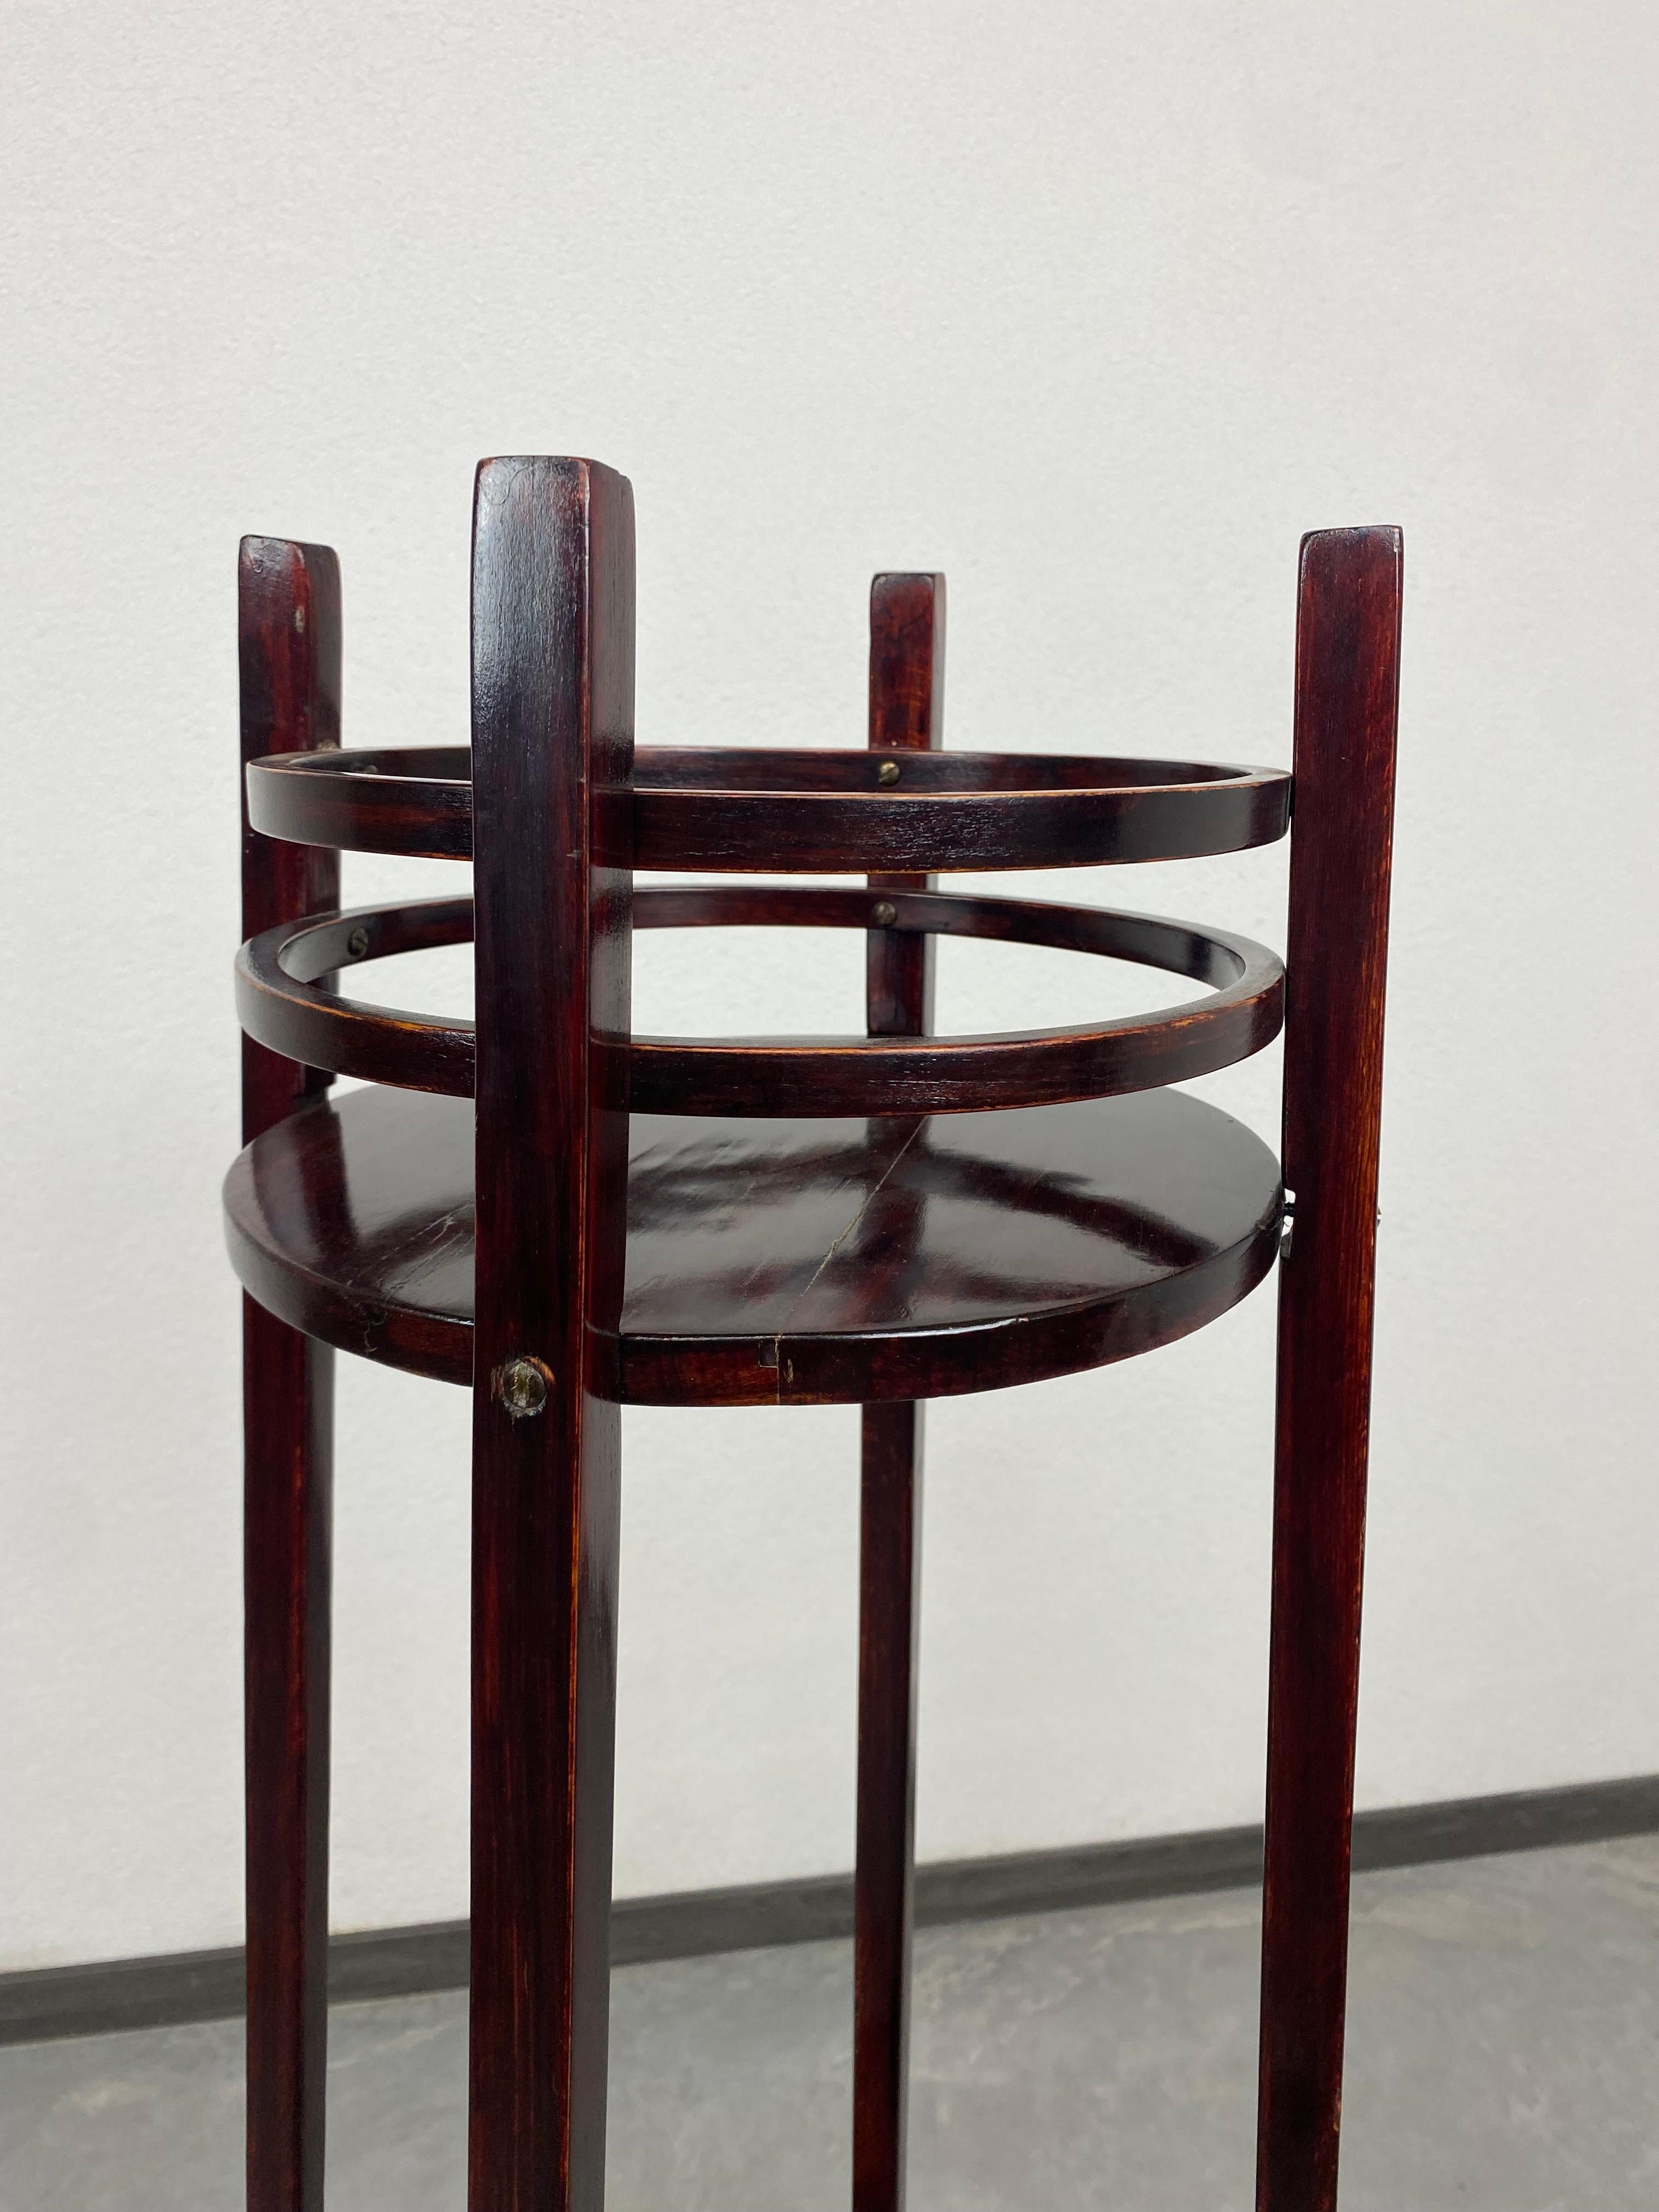 Vienna Secession Thonet Flower Stand No.31 For Sale